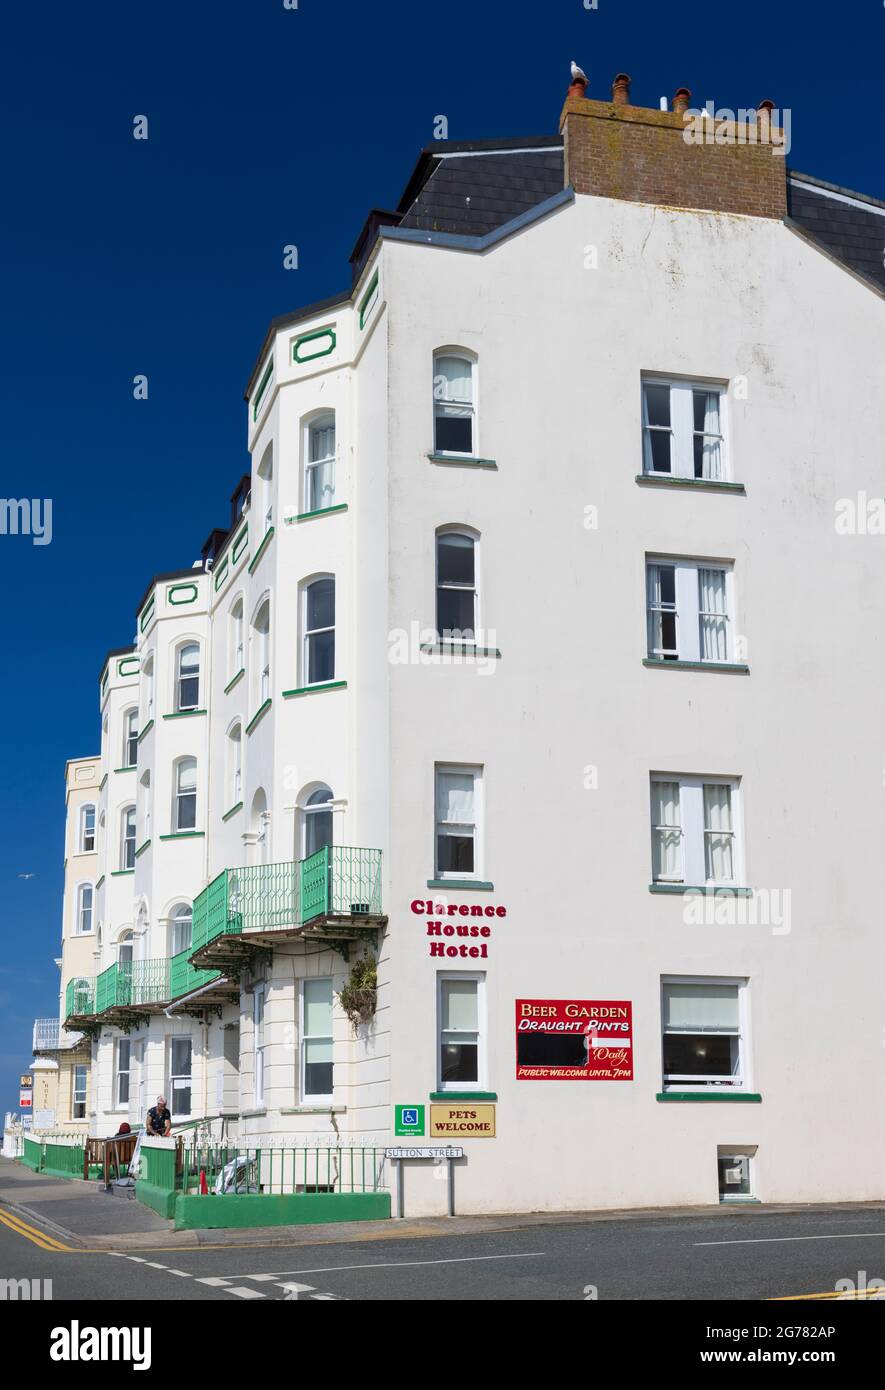 Clarence House Hotel on the Esplanade, Tenby, Pembrokeshire, Galles Foto Stock